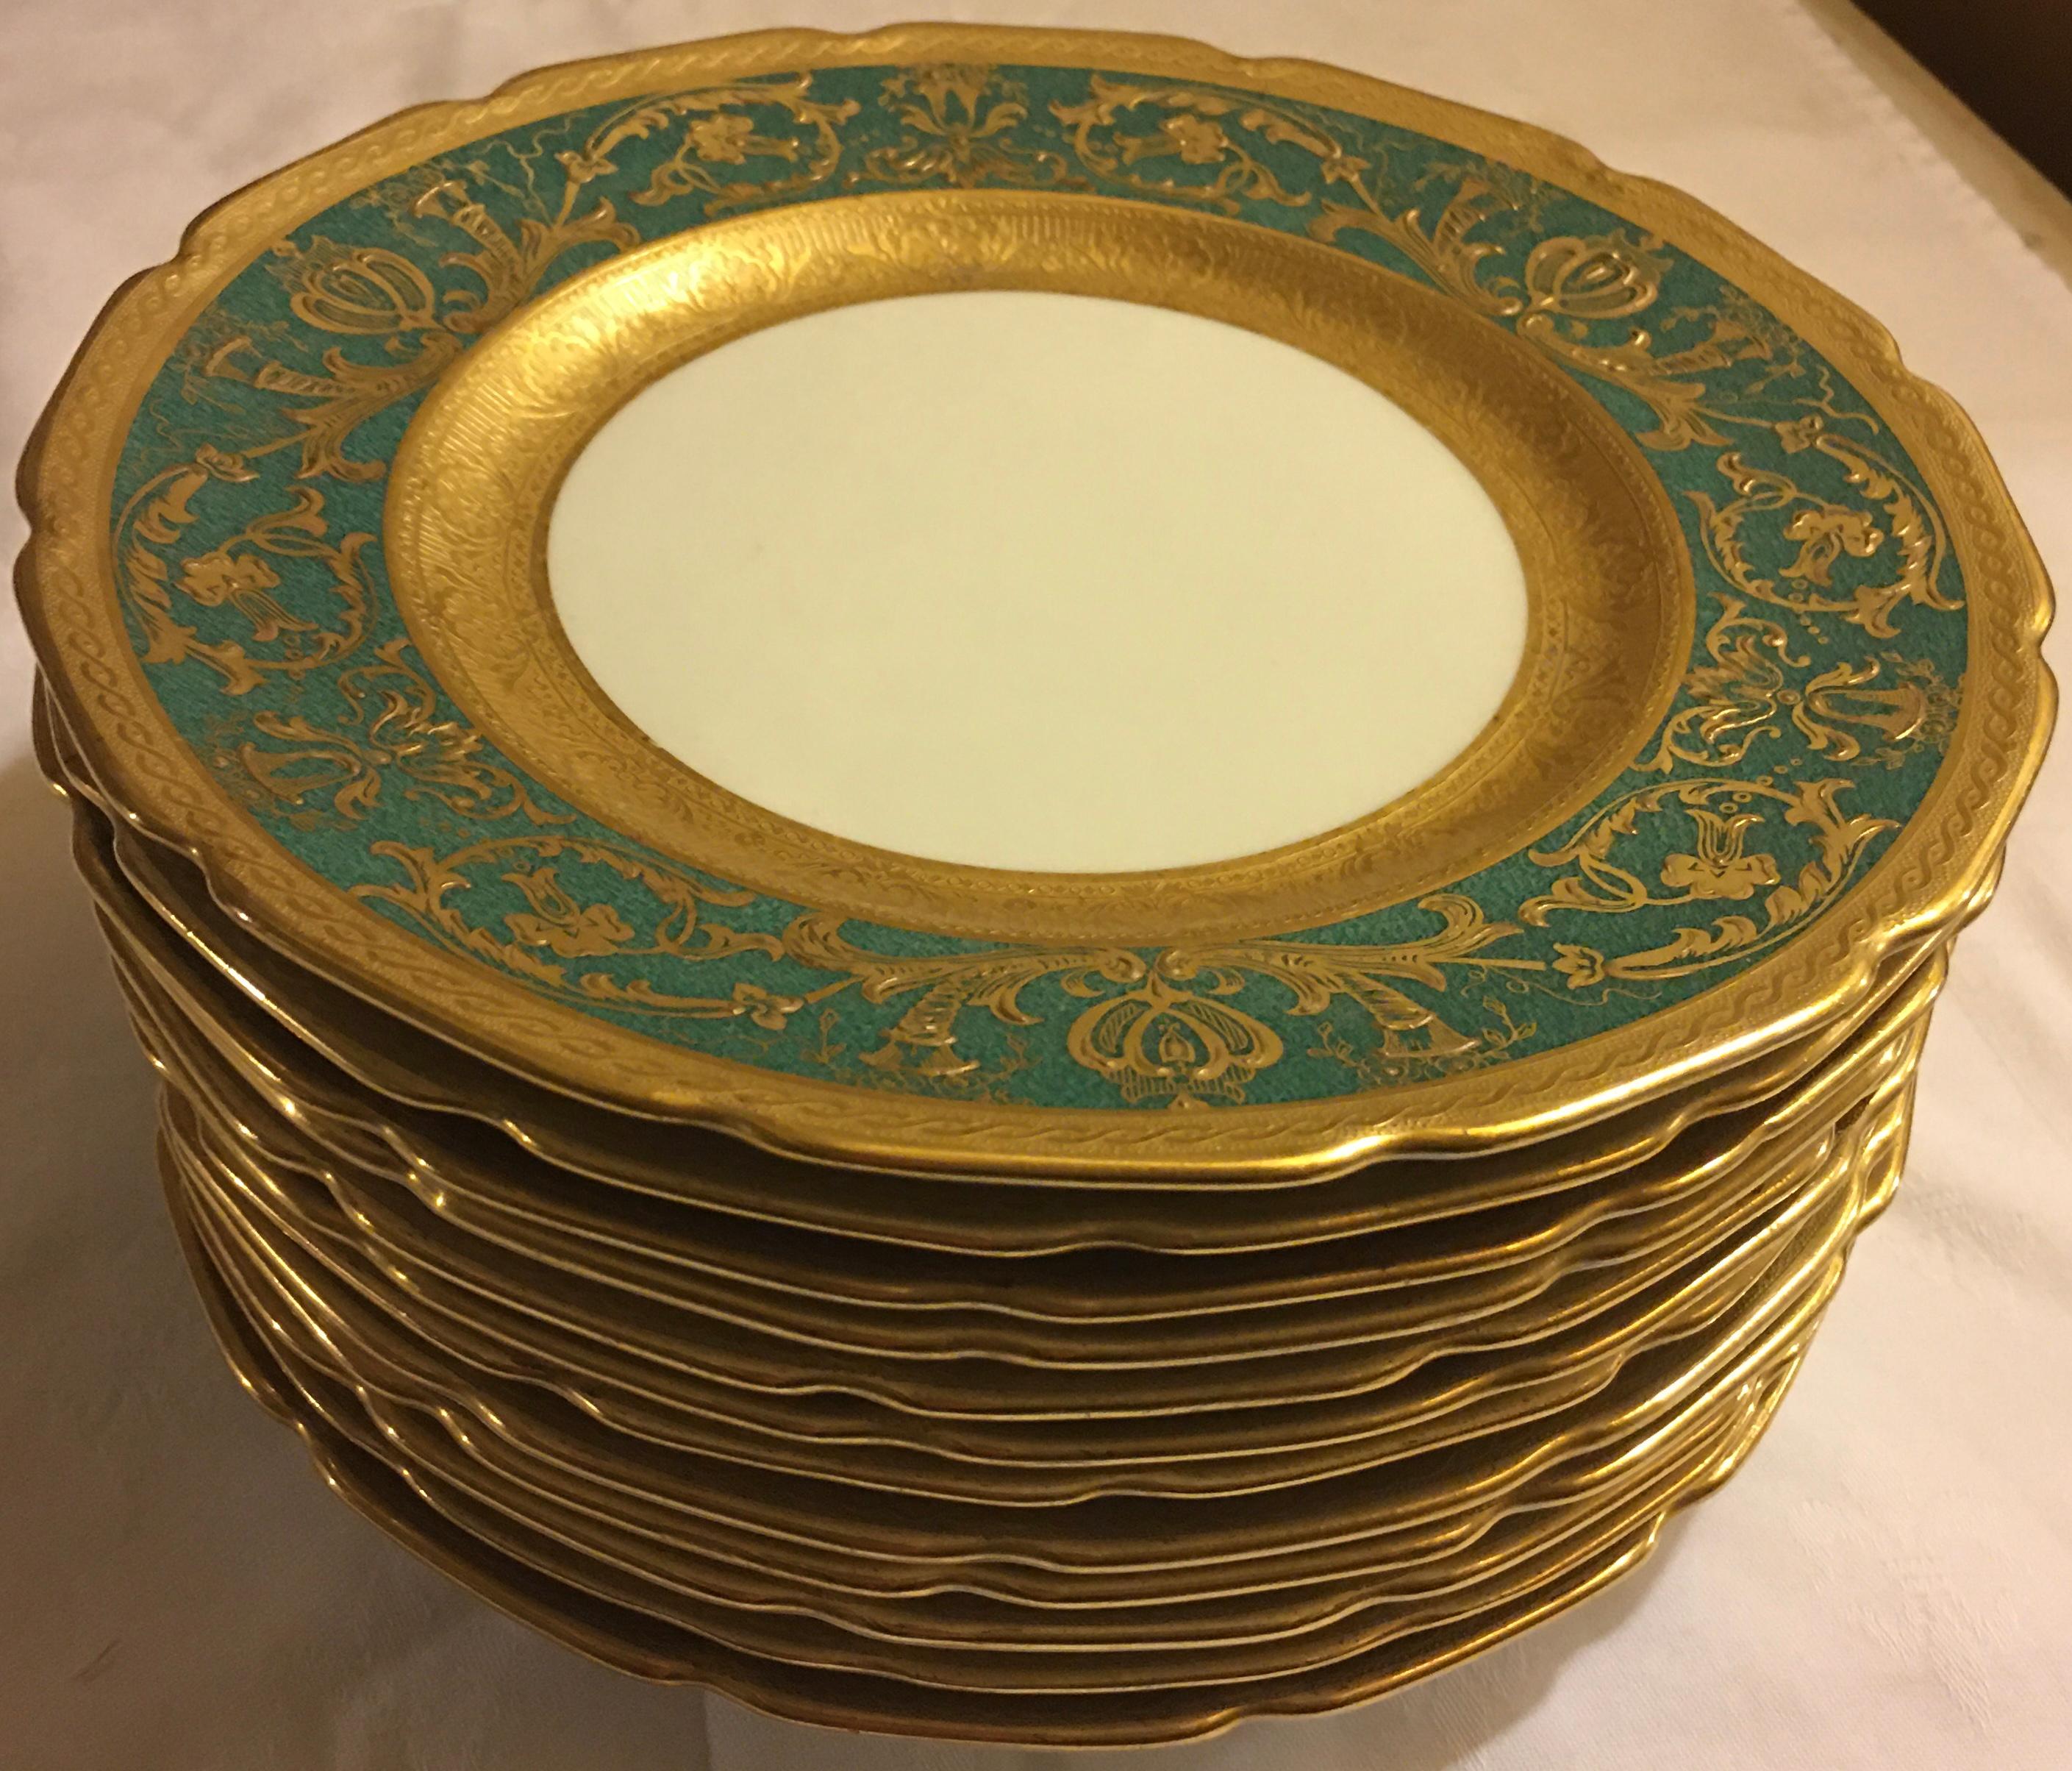 This set of 12 unique gold encrusted Royal Doulton teal-on-white dessert plates were customized for Ovington’s of New York, renowned provider in the 19th century of the finest in China and tableware. All 12 plates are in very good condition, with